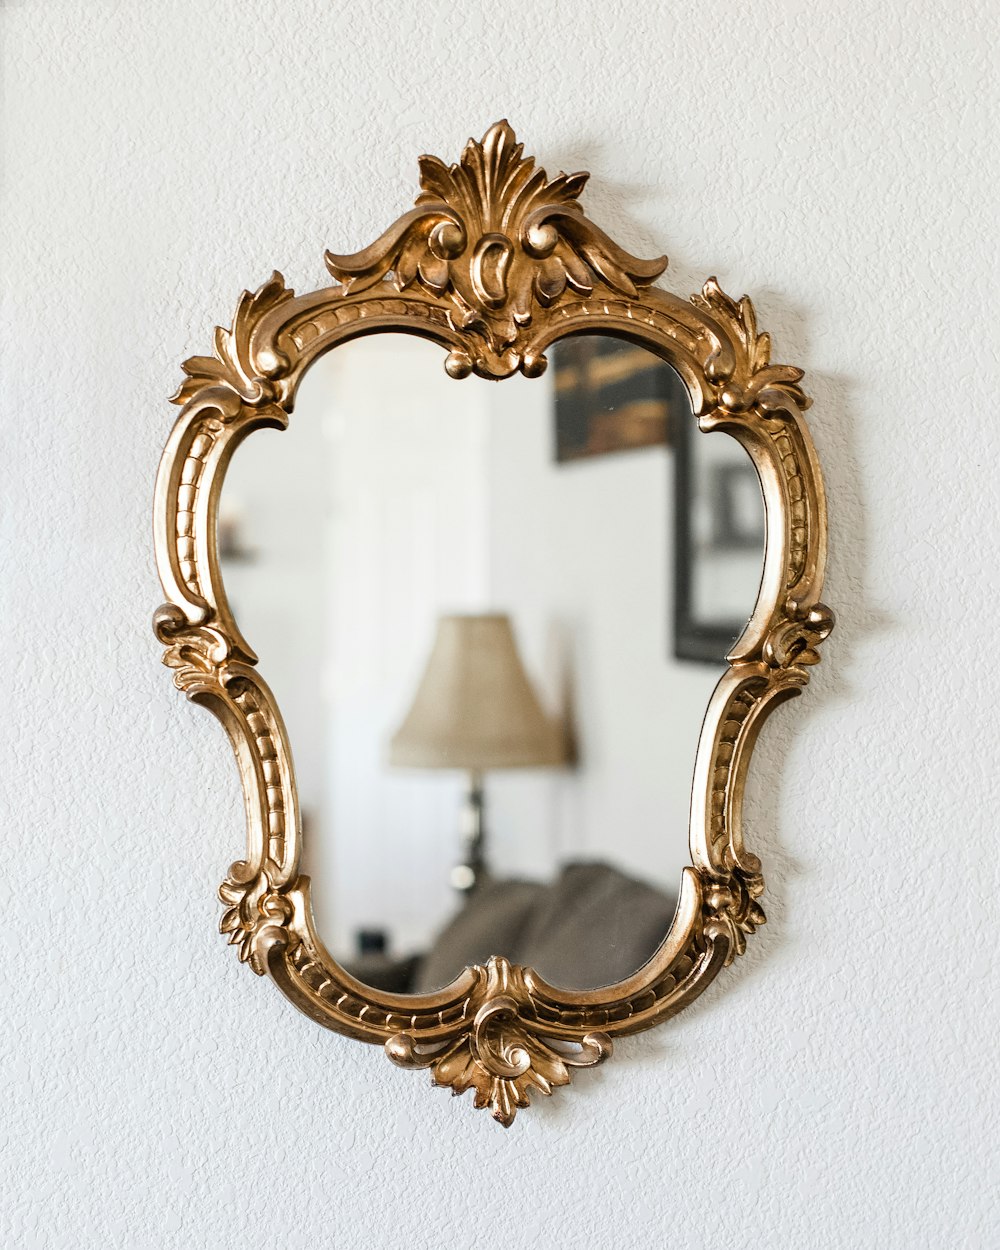 a mirror hanging on a wall next to a lamp